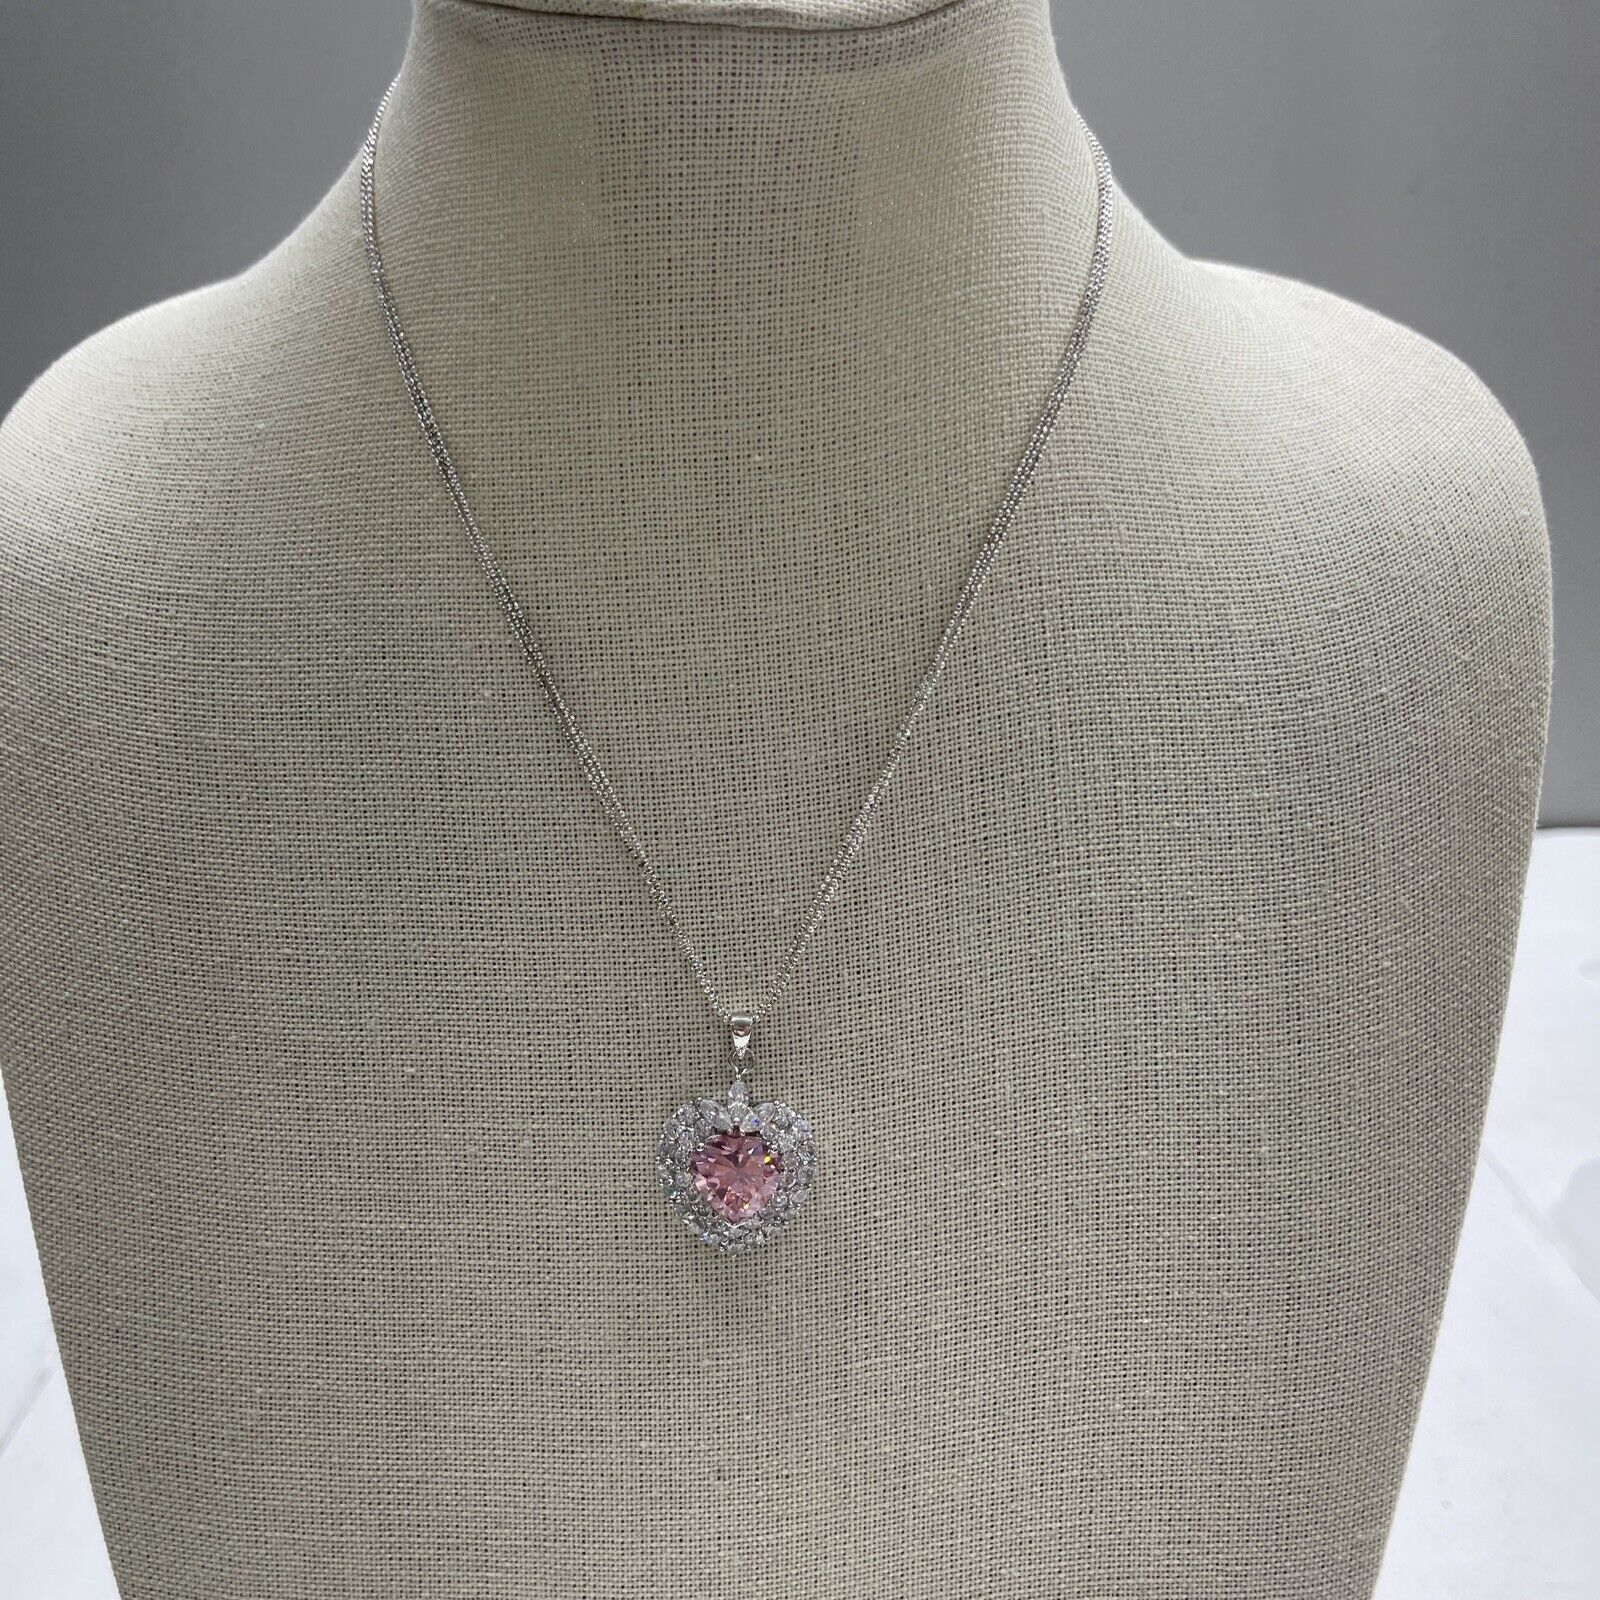 Girls Pink Cubic Zirconia Sterling Silver Heart Pendant Necklace - JCPenney